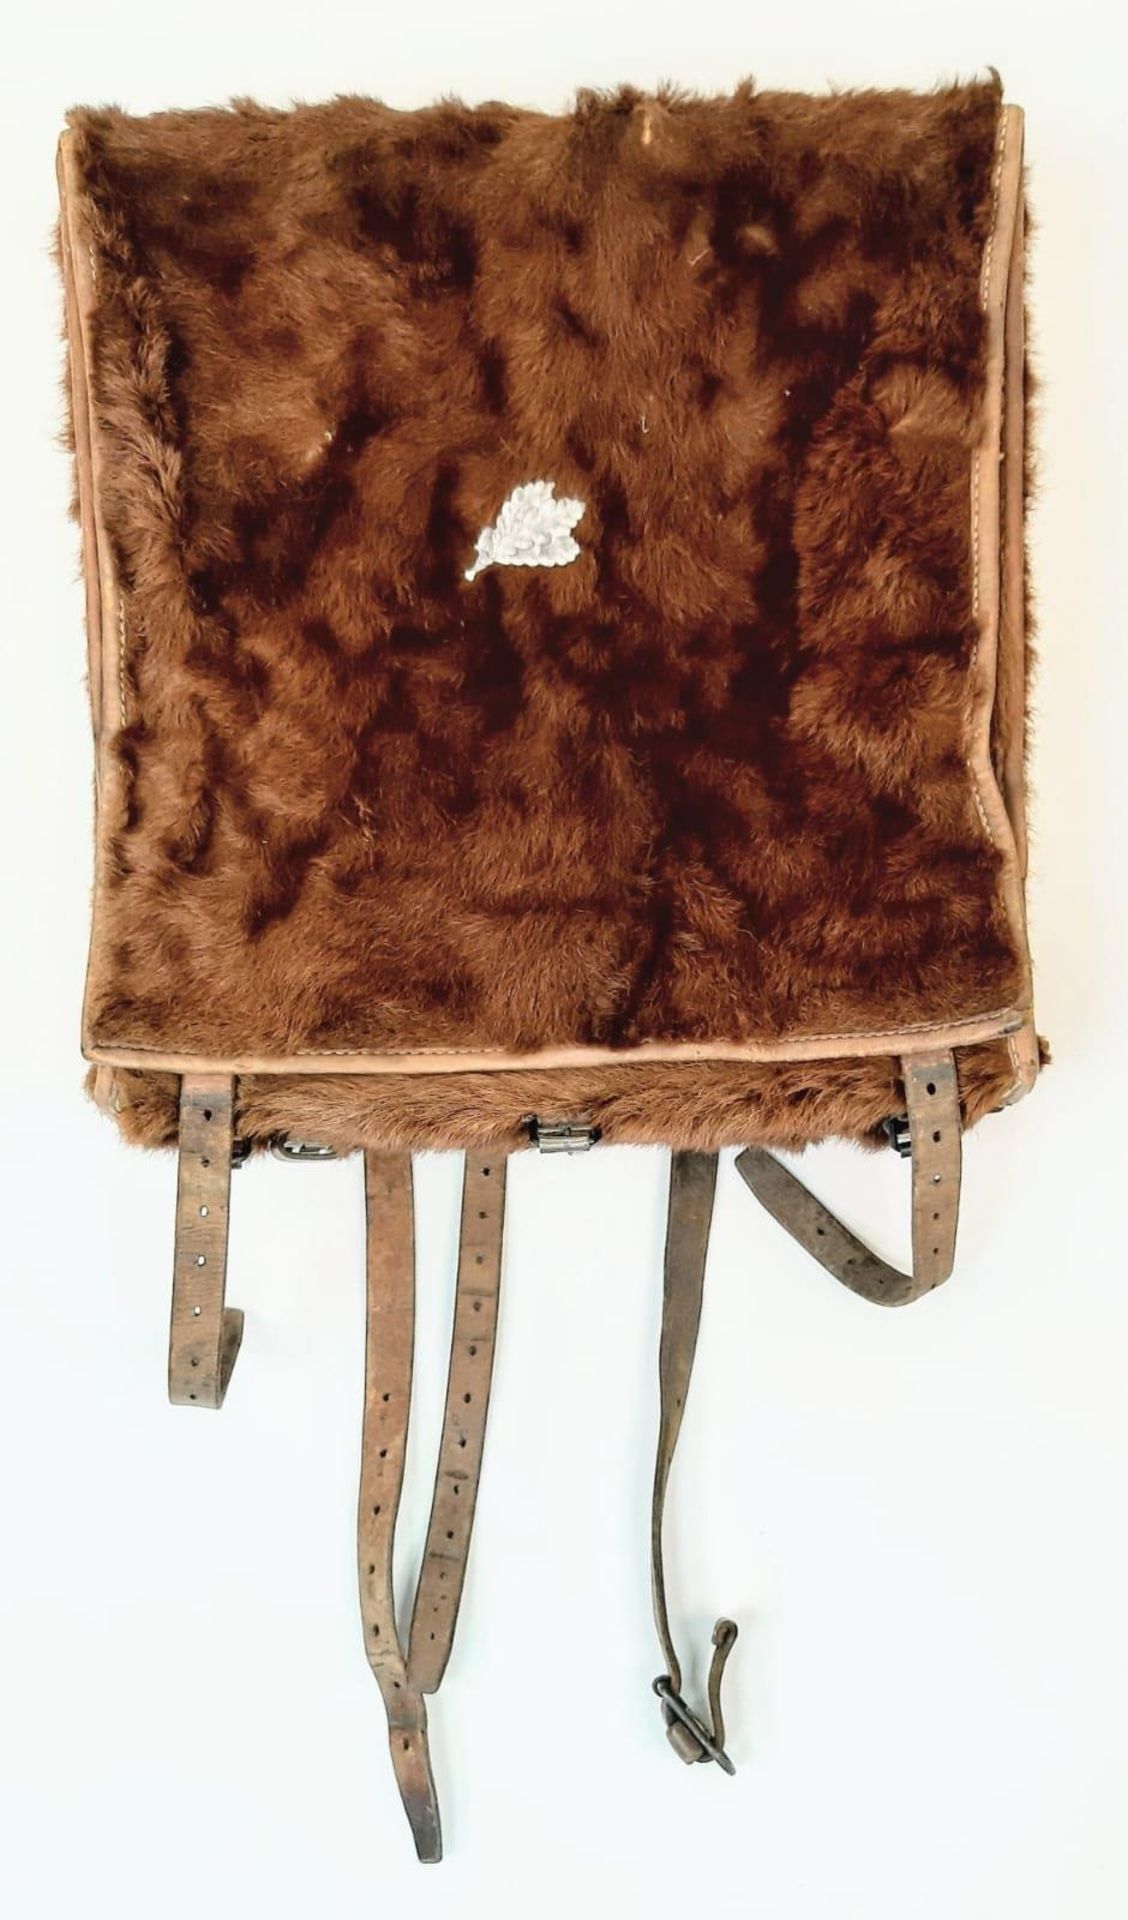 WW2 1943 Dated Swiss Tournister Pony Pack used by the German Gebirgsjäger Mountain Troops as they